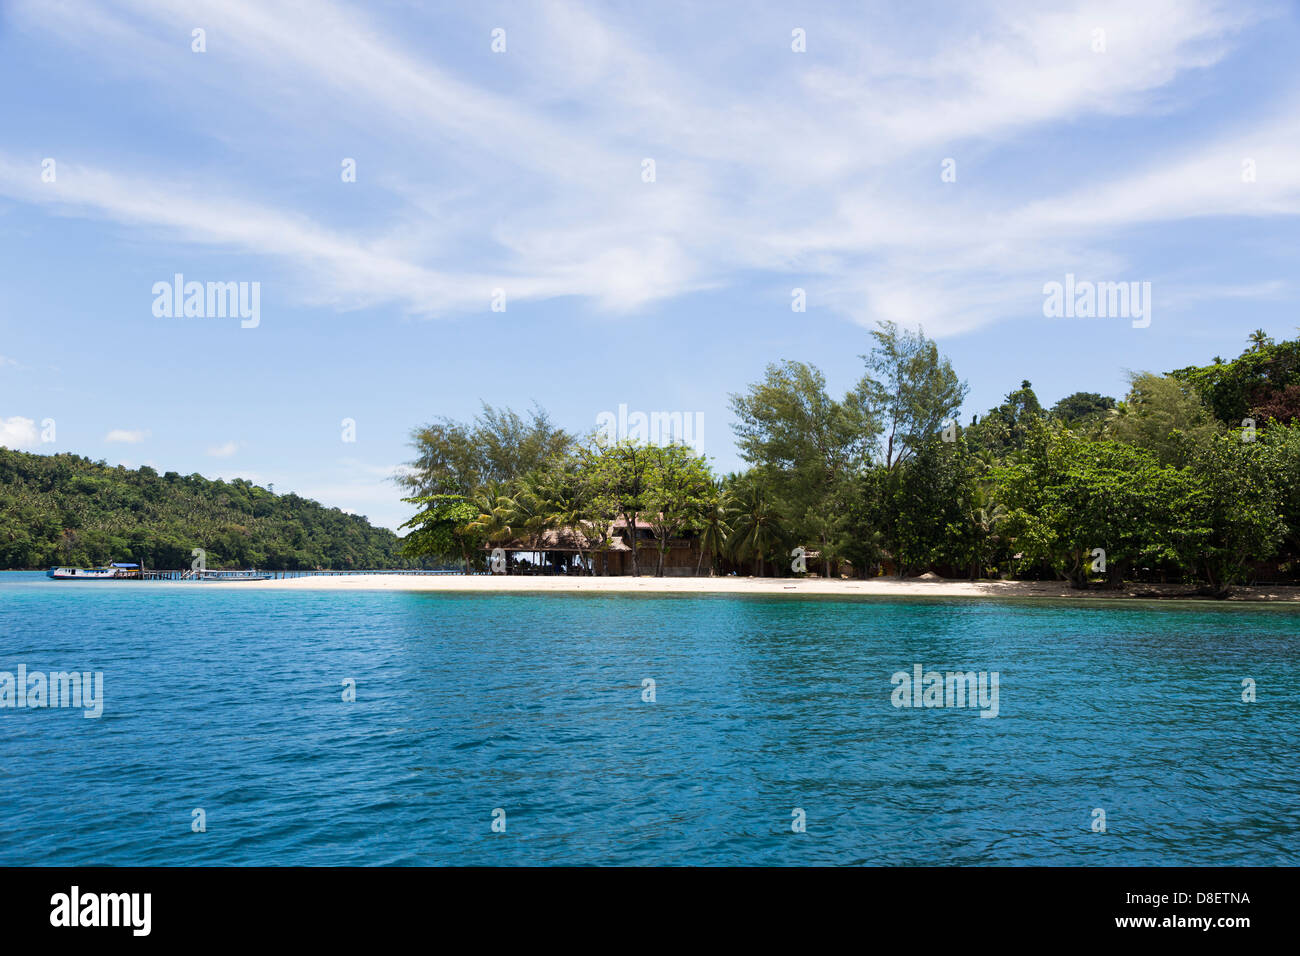 An isolated beach in the Togians island in Sulawesi, Indonesia Stock Photo